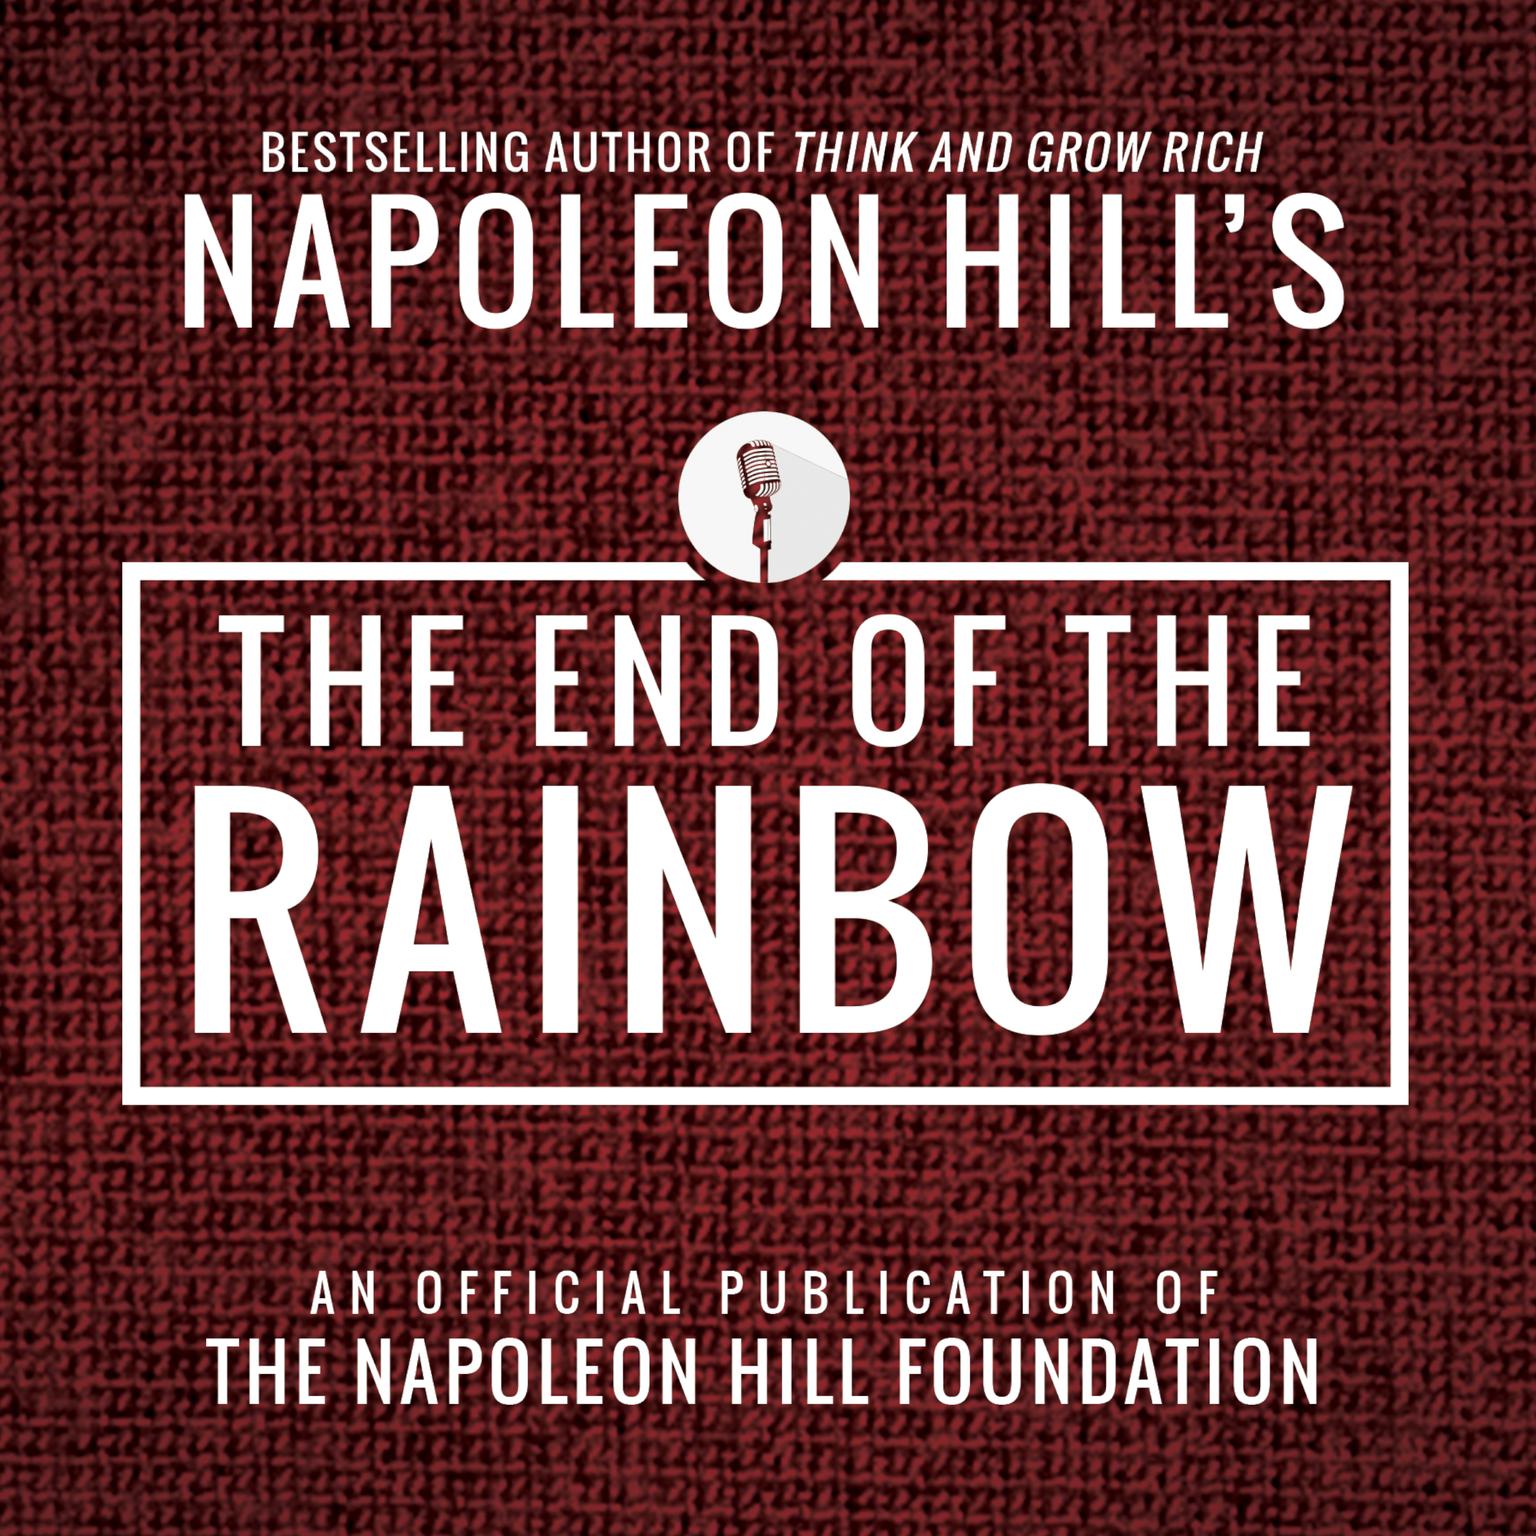 The End of the Rainbow:An Official Publication of the Napoleon Hill Foundation Audiobook, by Napoleon Hill